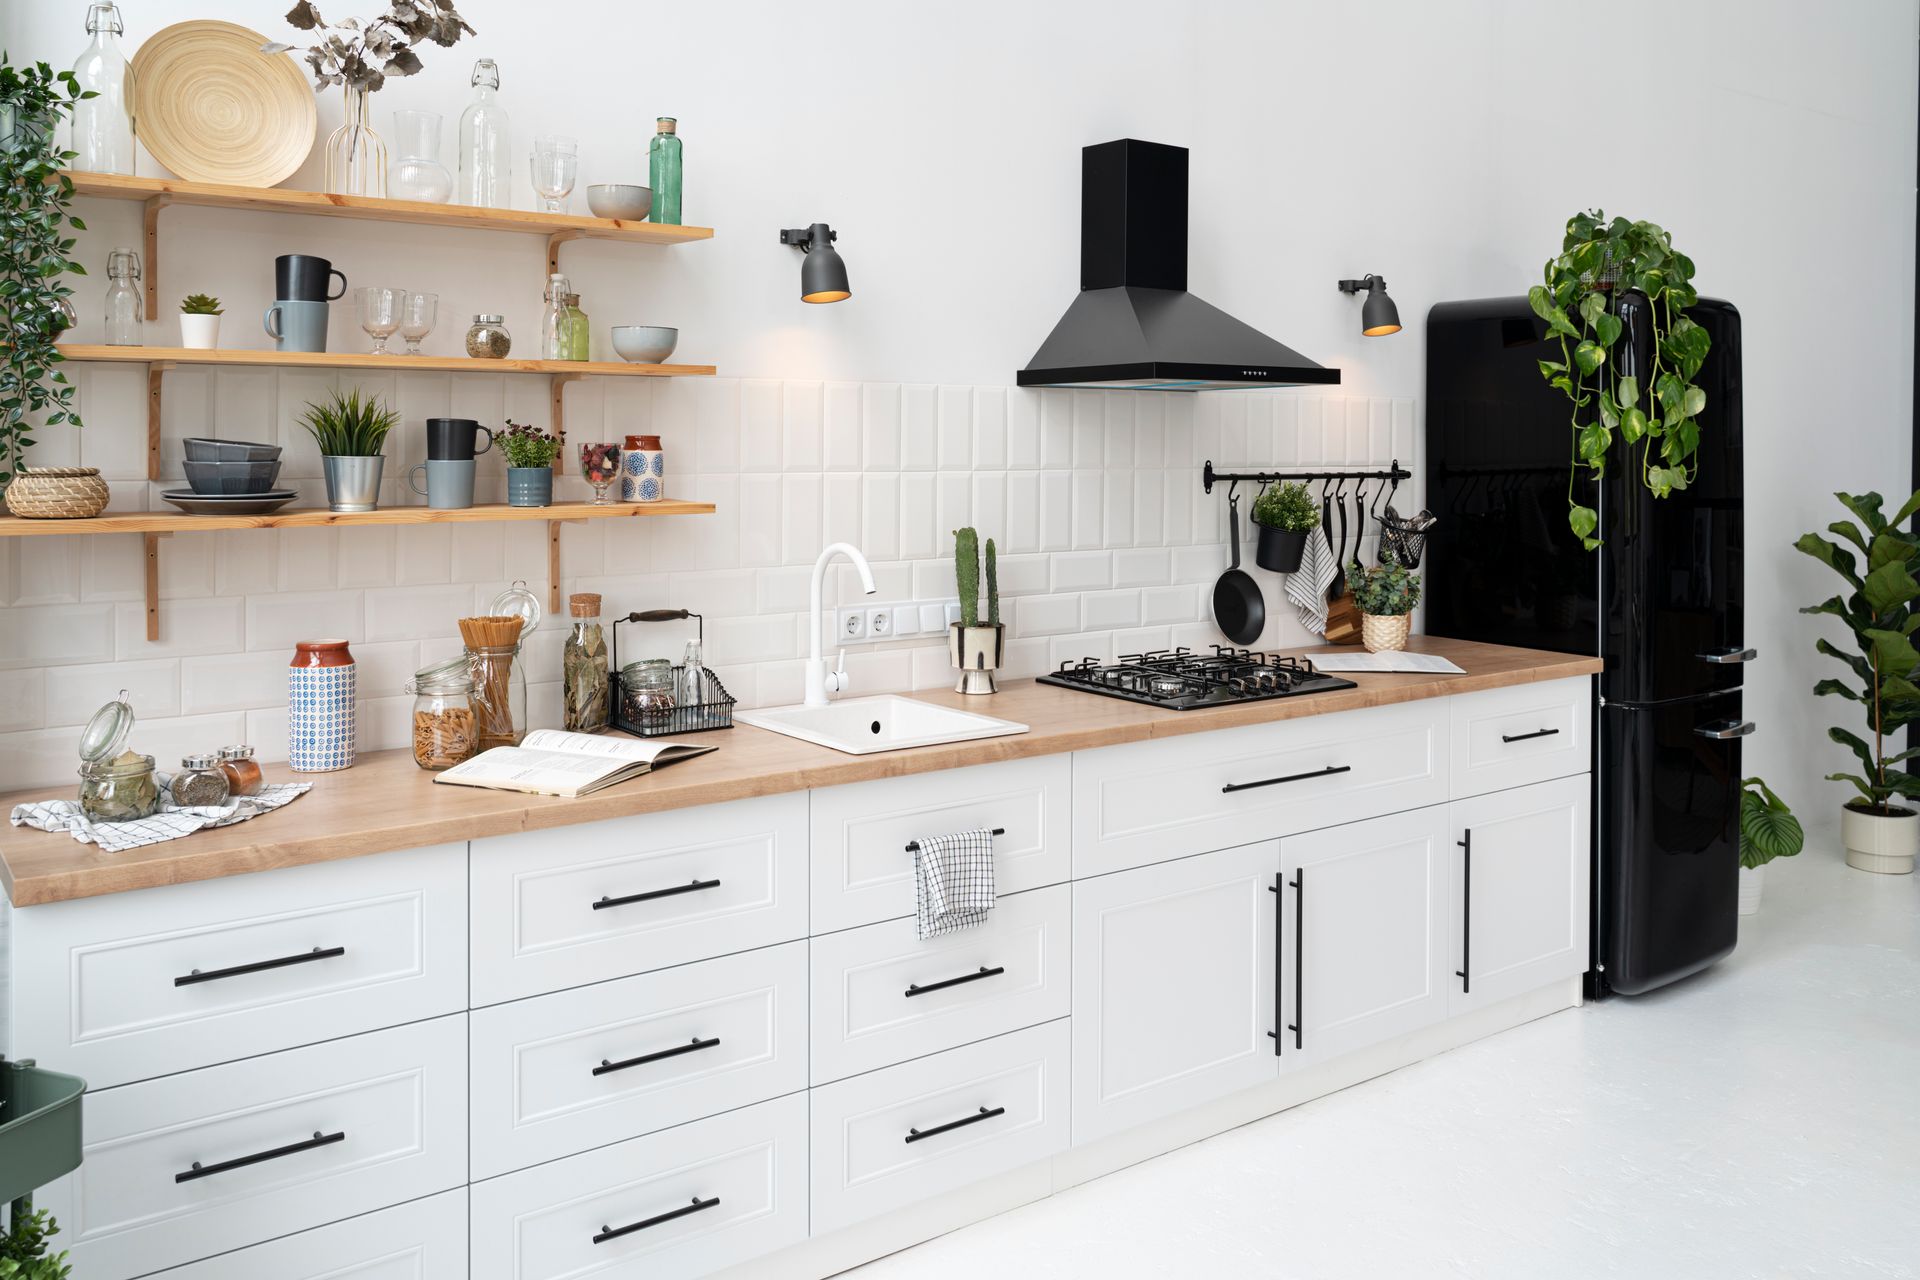 a kitchen with white cabinets and a black refrigerator .